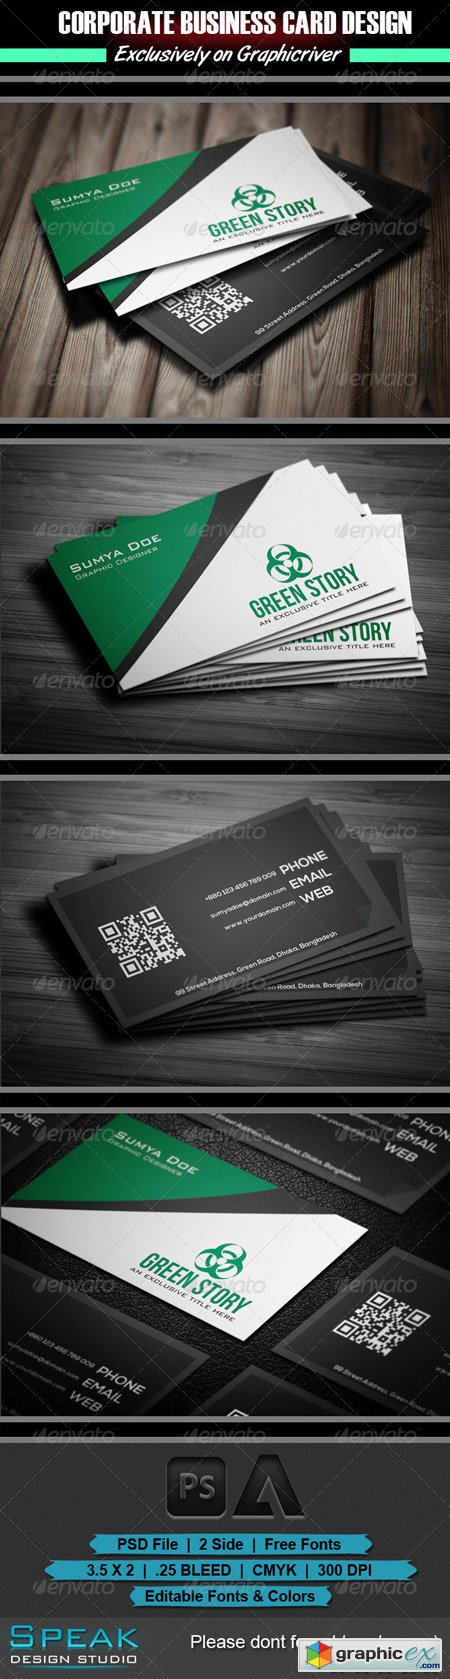 Green Story Business Card